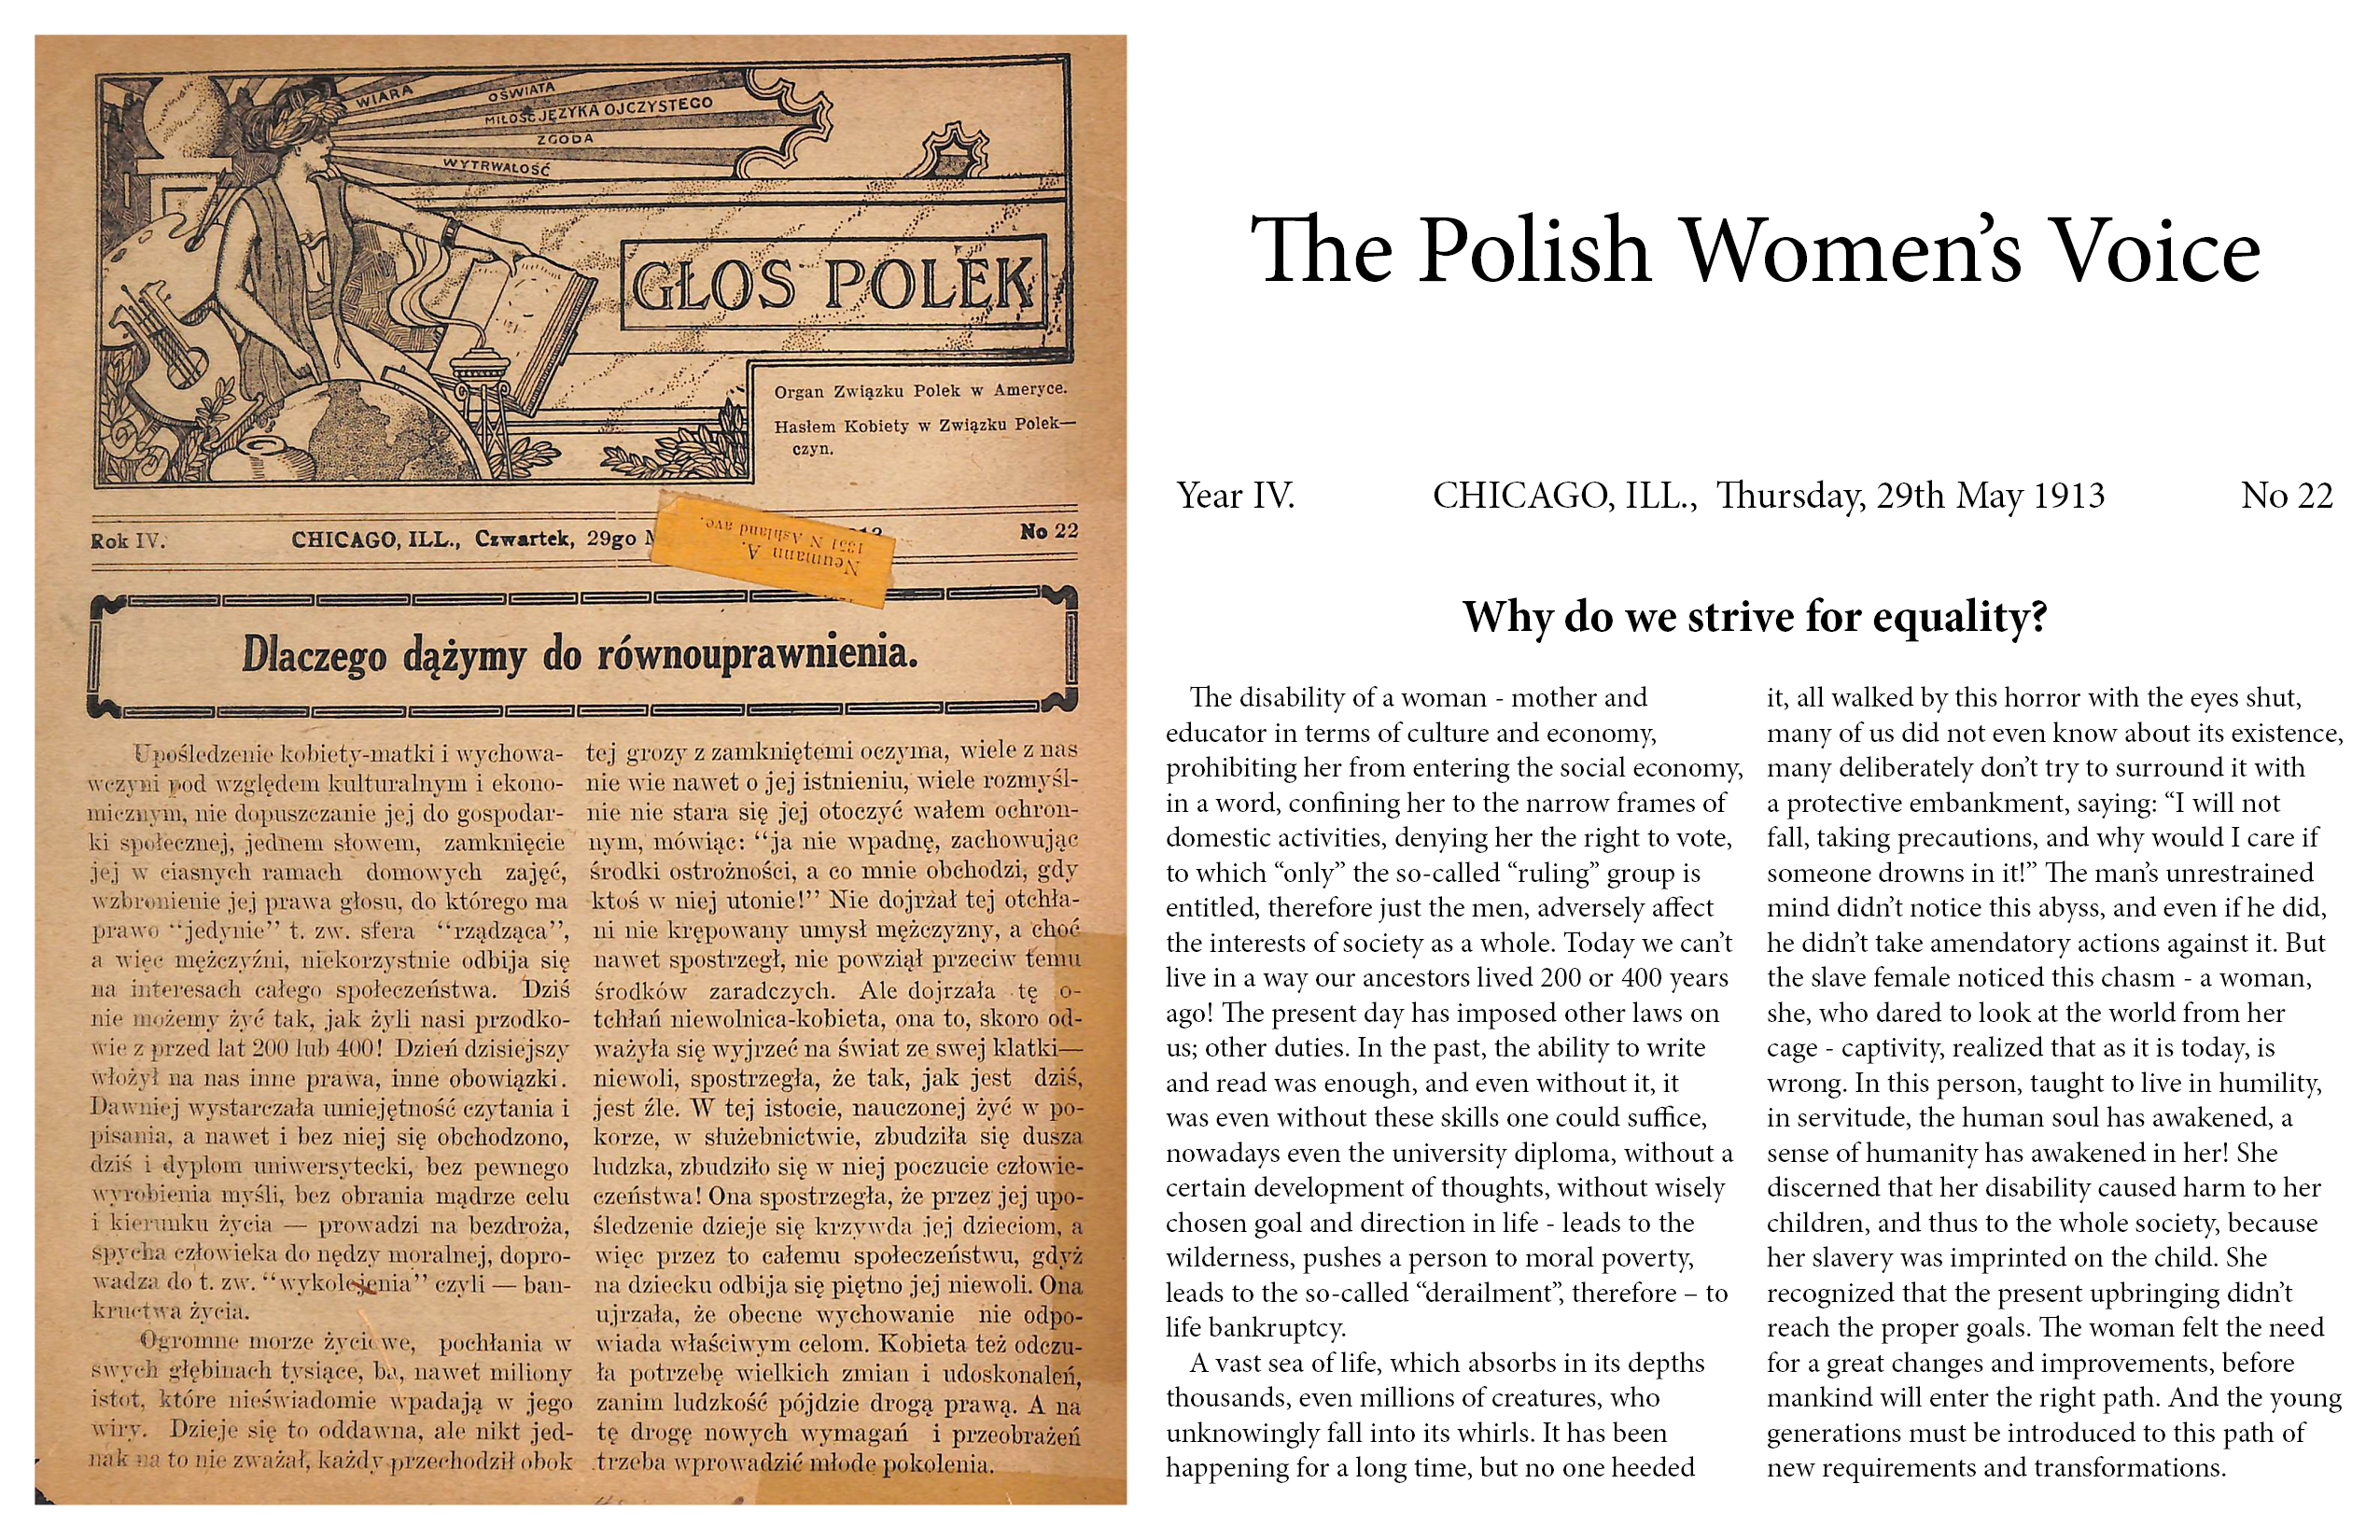 Glos Polek Suffrage Articles